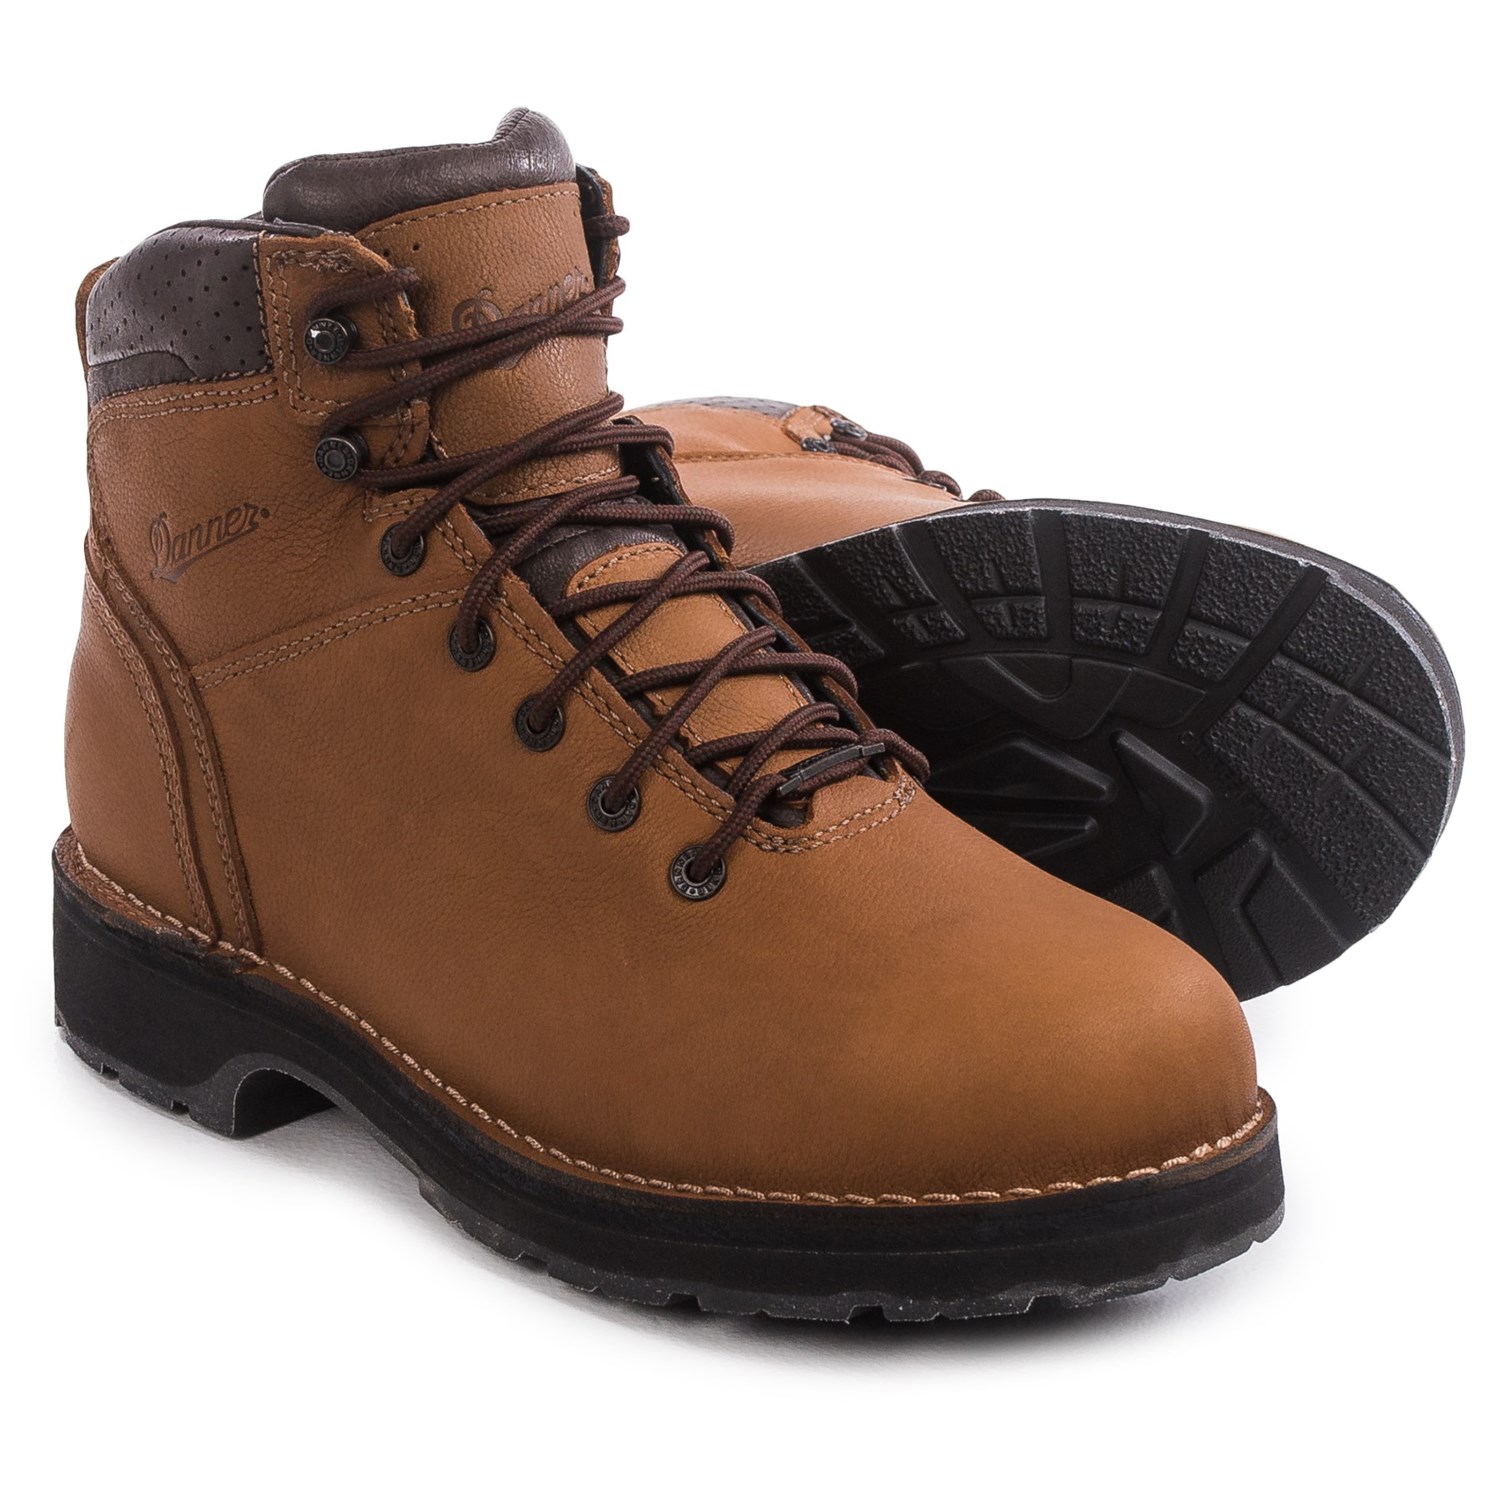 Danner Work Boots For Men - Yu Boots